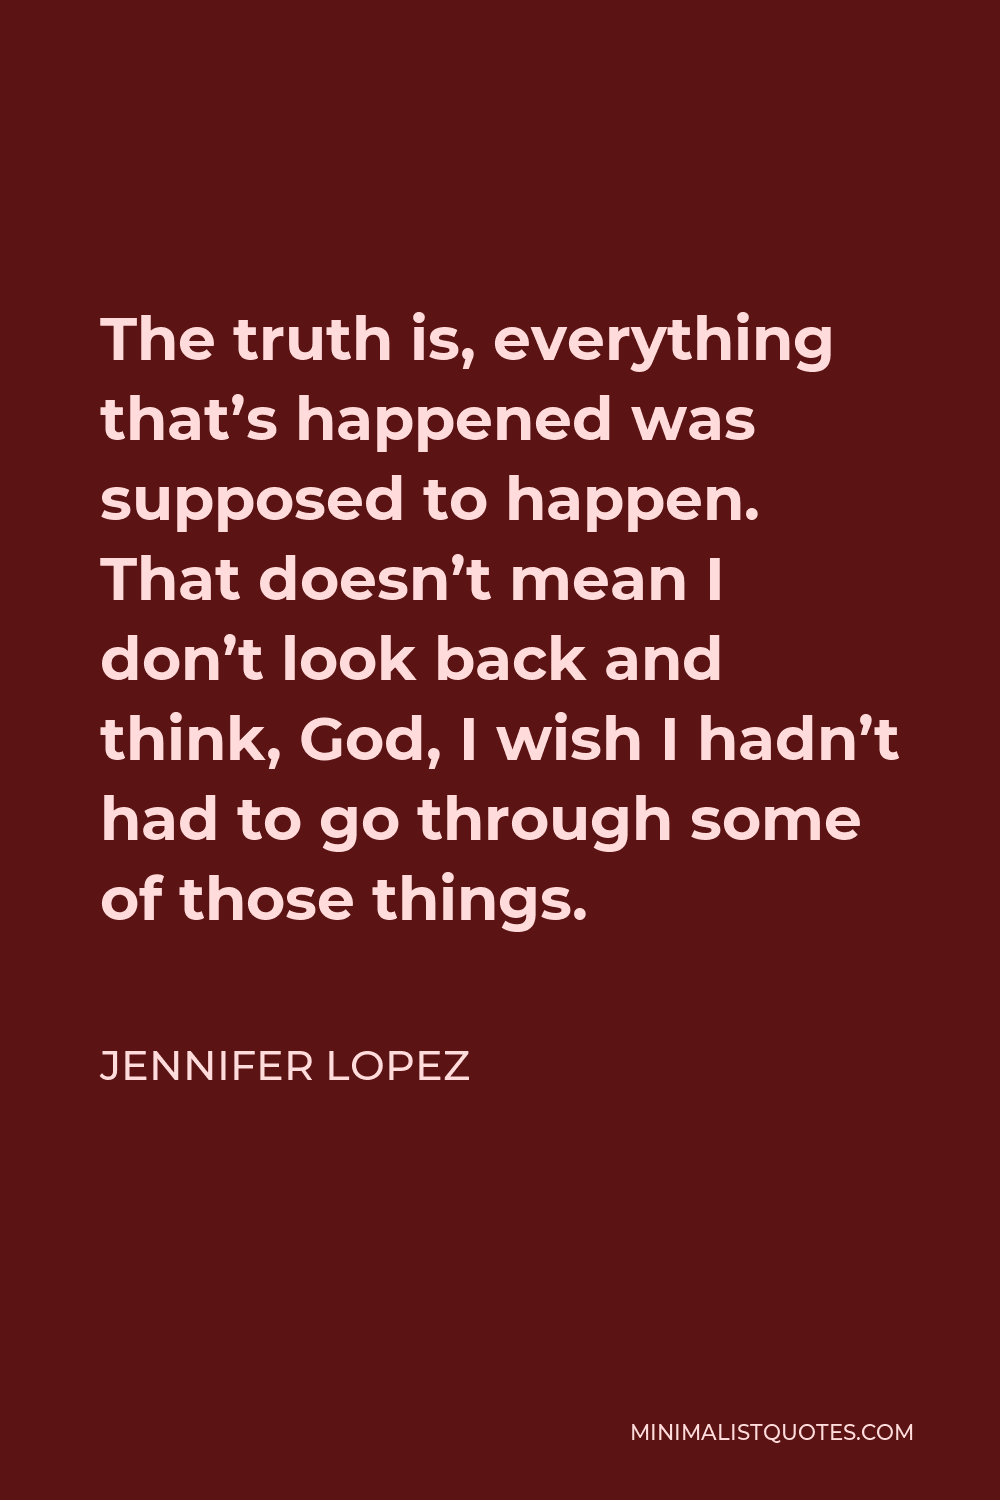 Jennifer Lopez Quote - The truth is, everything that’s happened was supposed to happen. That doesn’t mean I don’t look back and think, God, I wish I hadn’t had to go through some of those things.